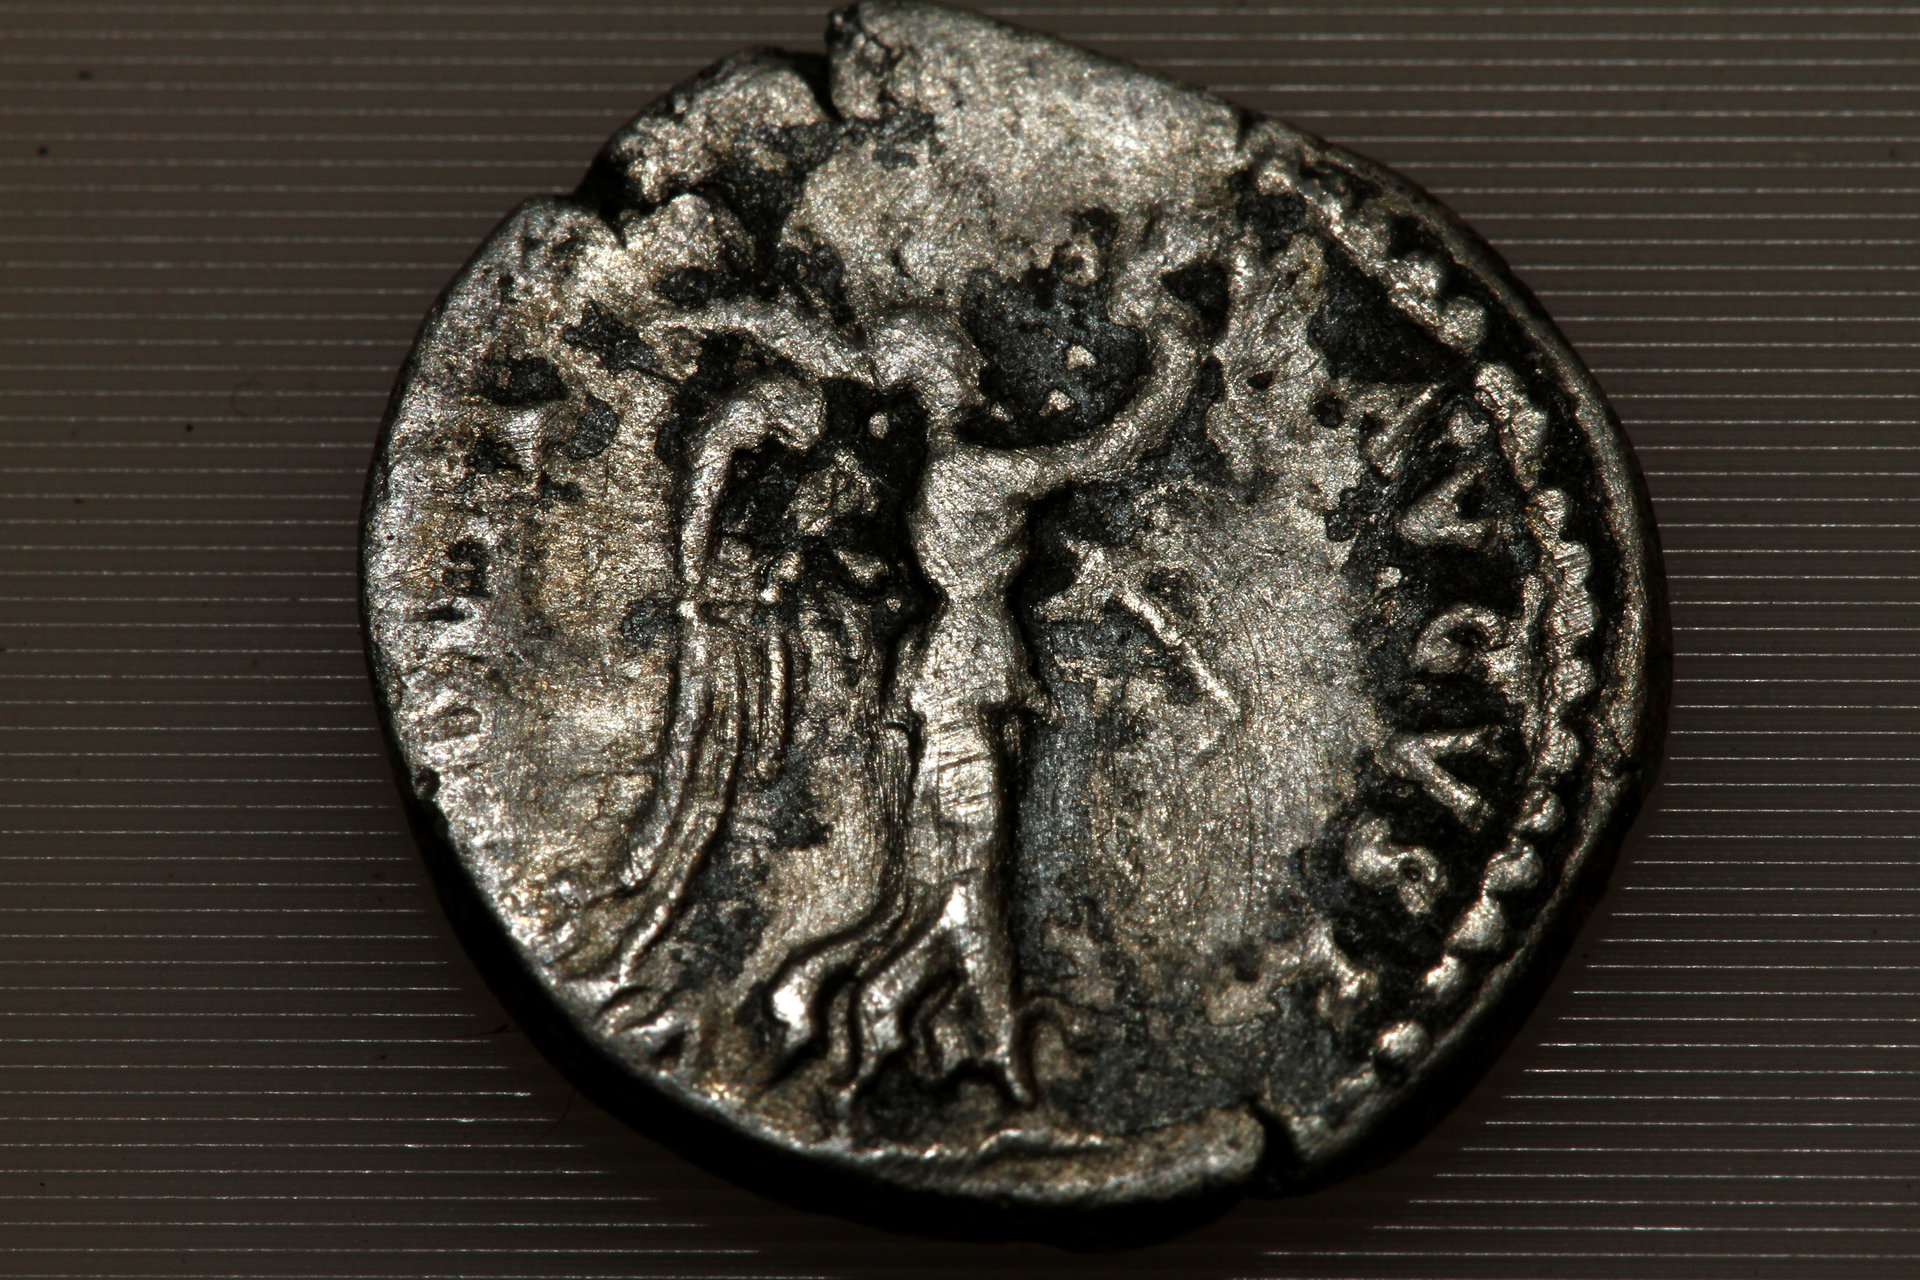 hi new to the group i have a titus coin